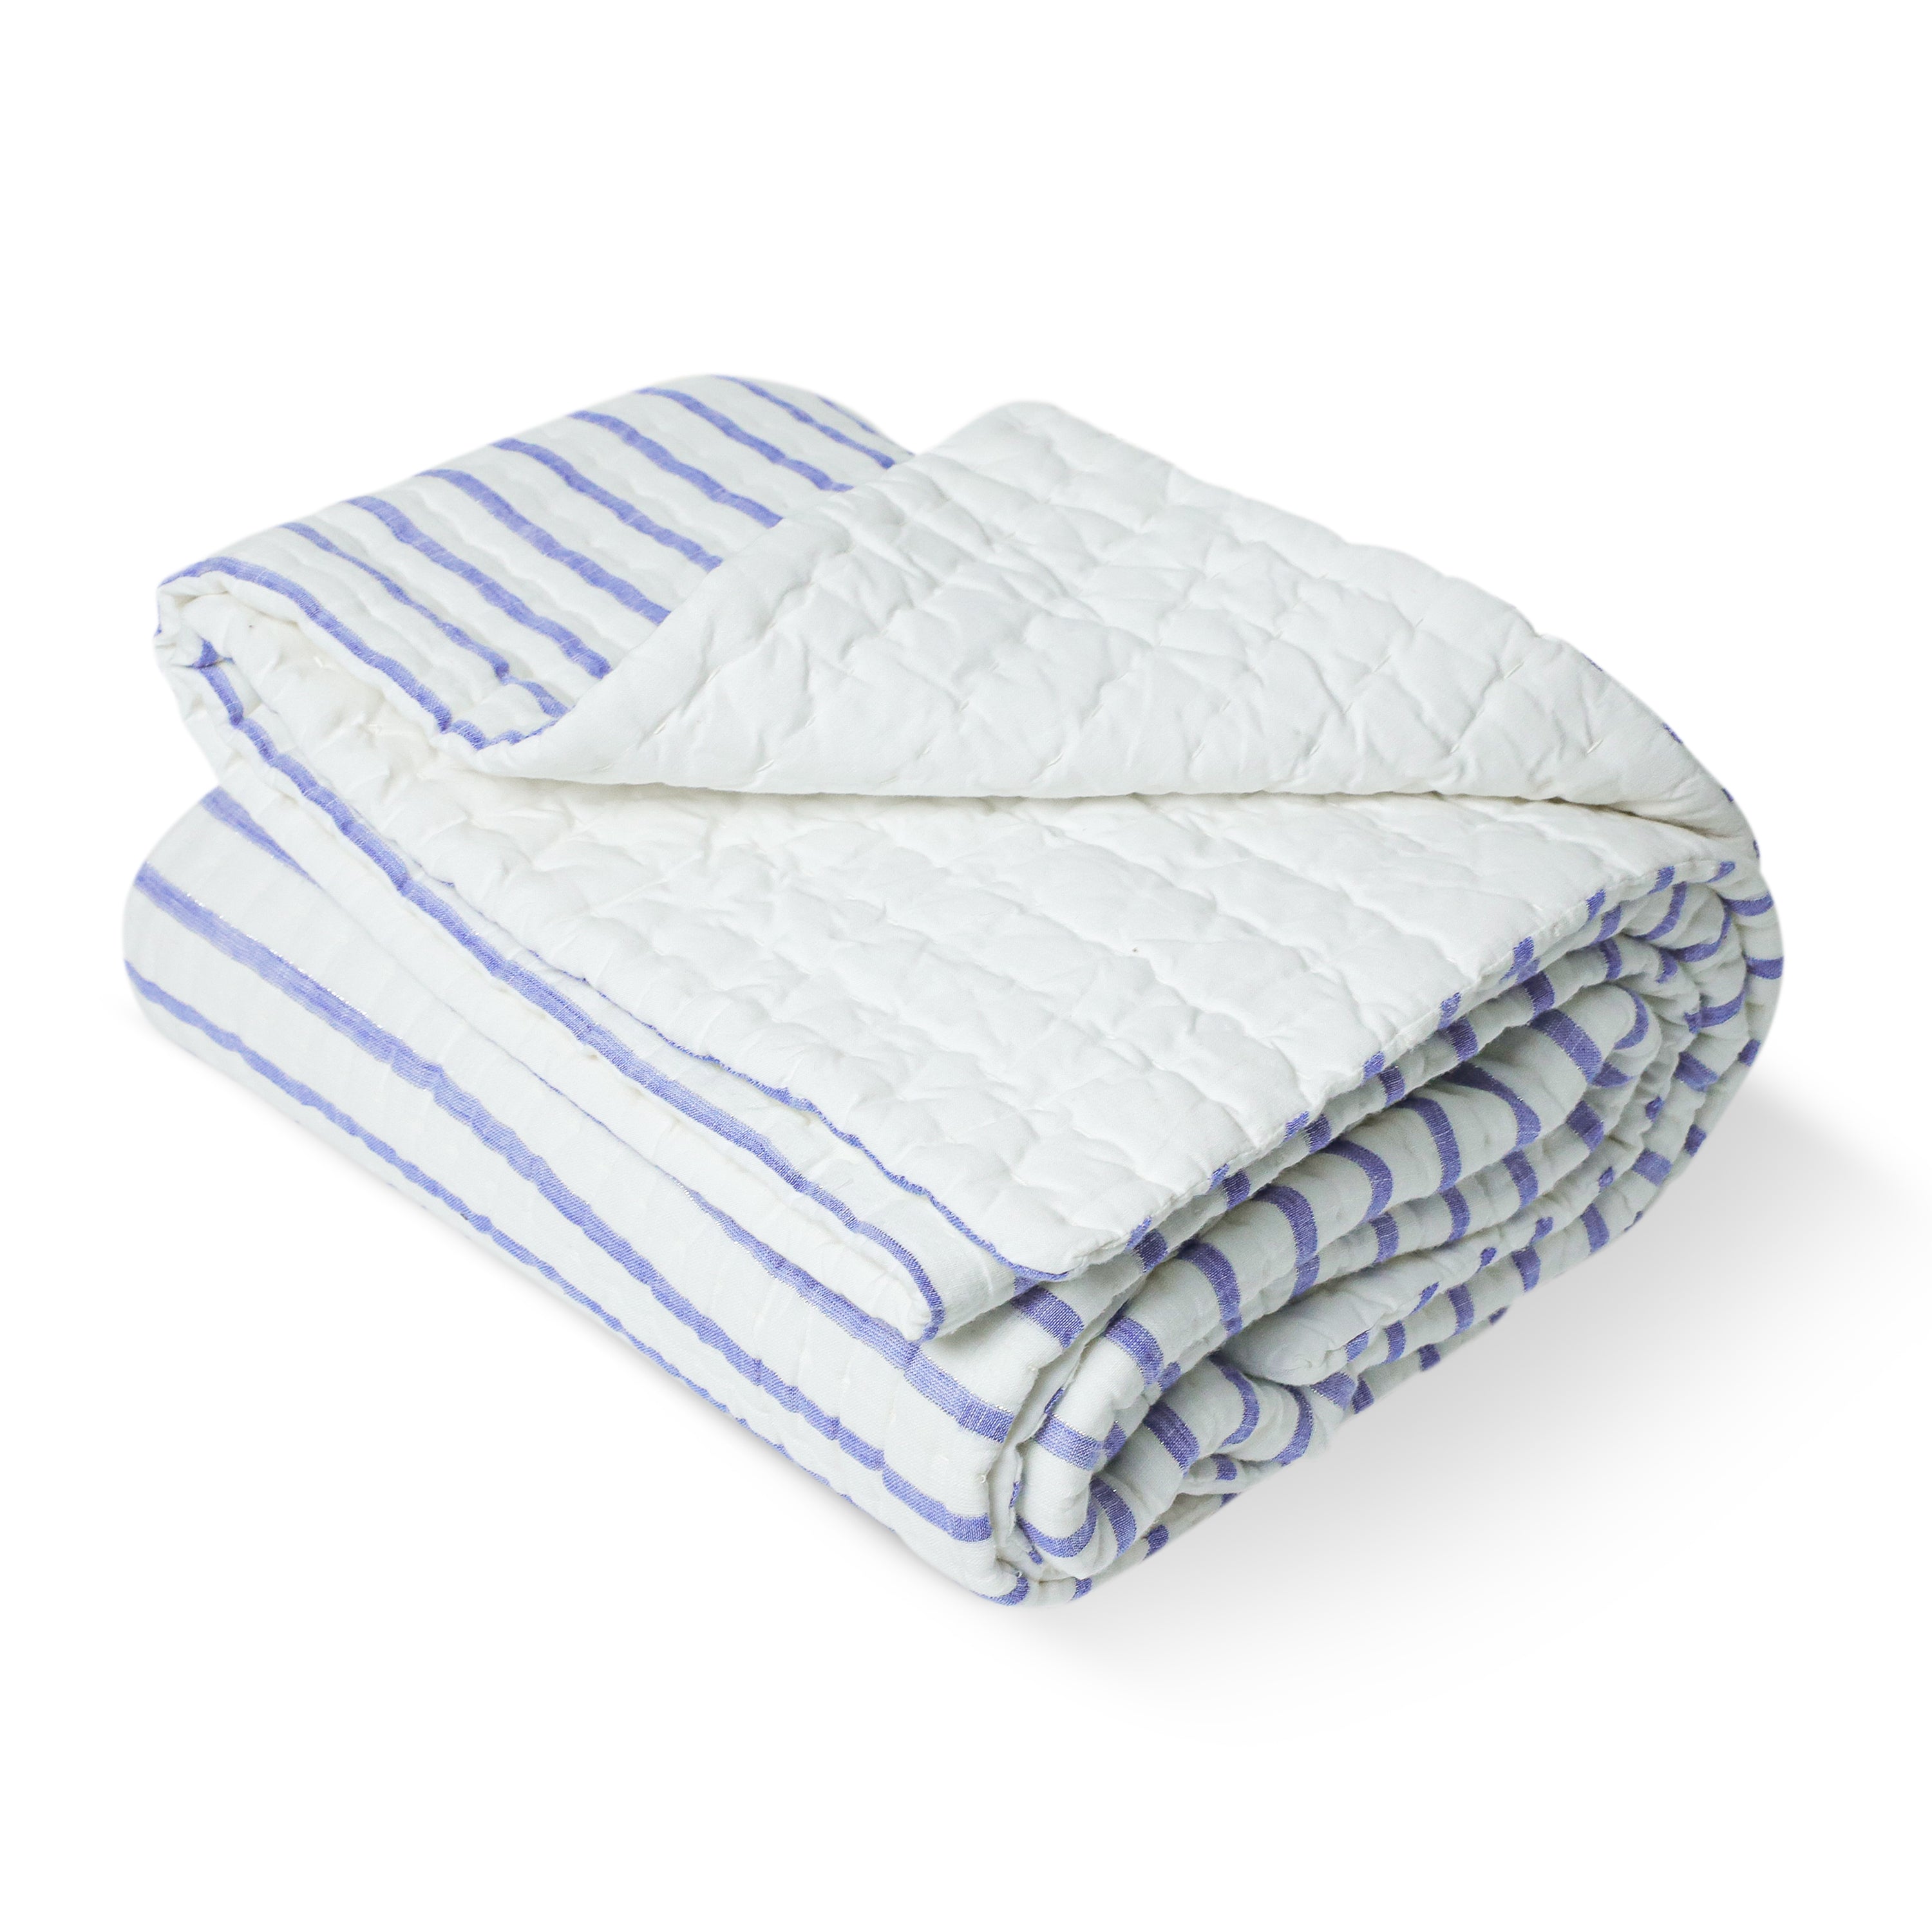 The striped quilt can be machine washed in gentle mode with mild detergent. The cotton batting keep the quilt breathable. 